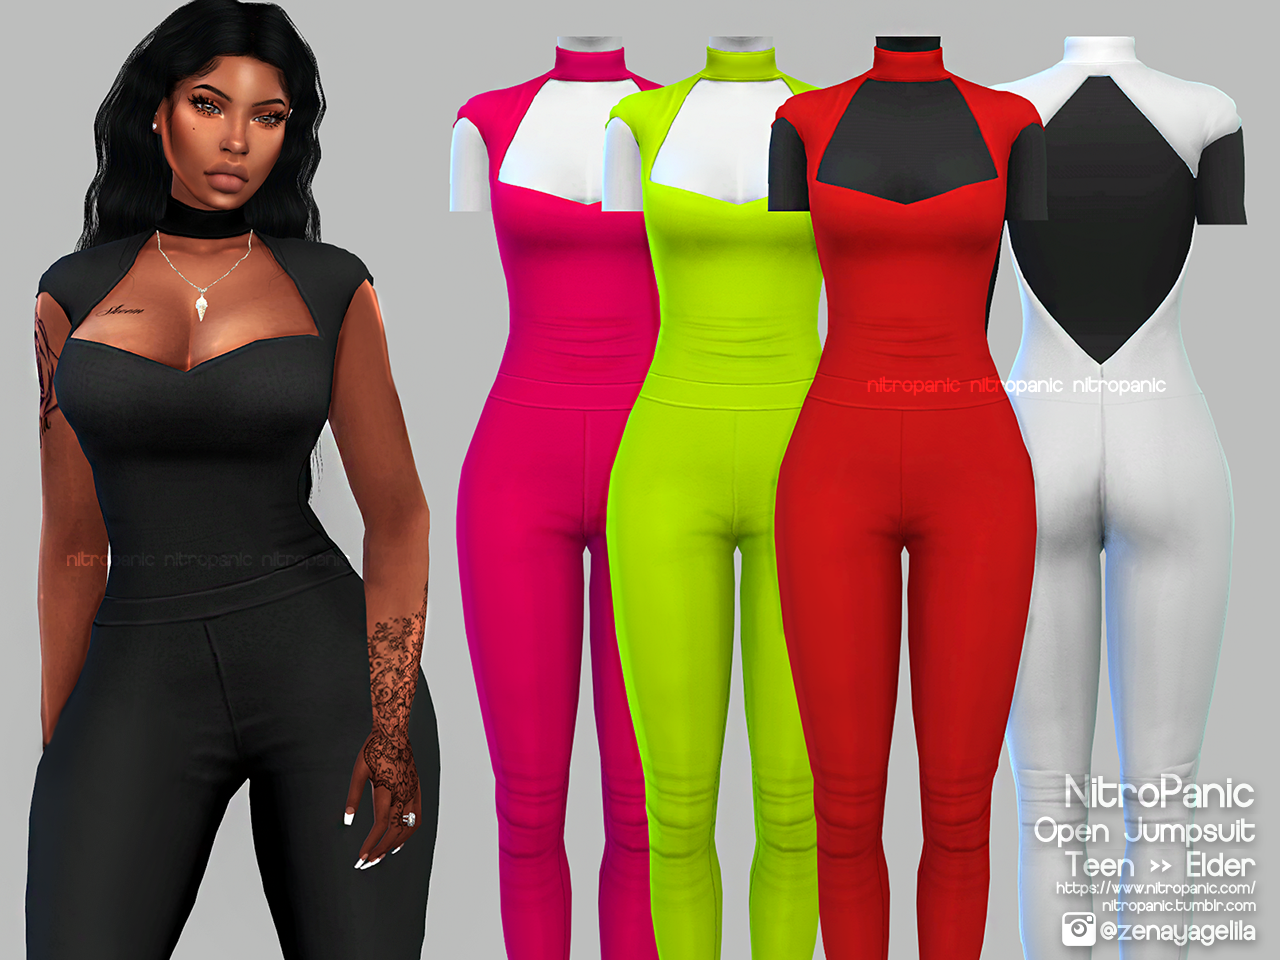 Sims 4 CC's - The Best: Clothing by NitroPanic